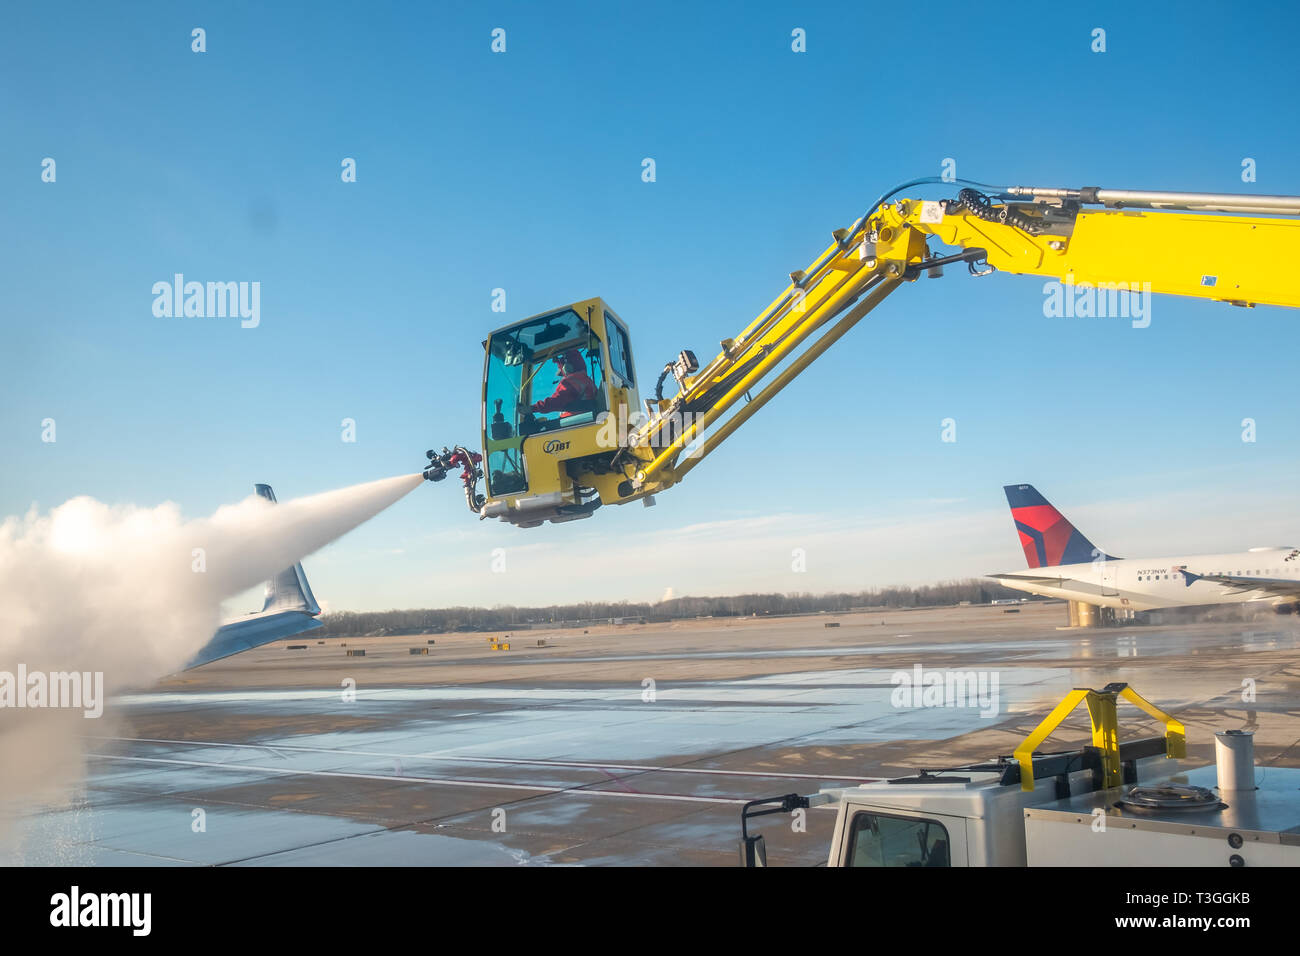 Jet wing being de-iced. Detroit Metro Airport (DTW), USA. Stock Photo